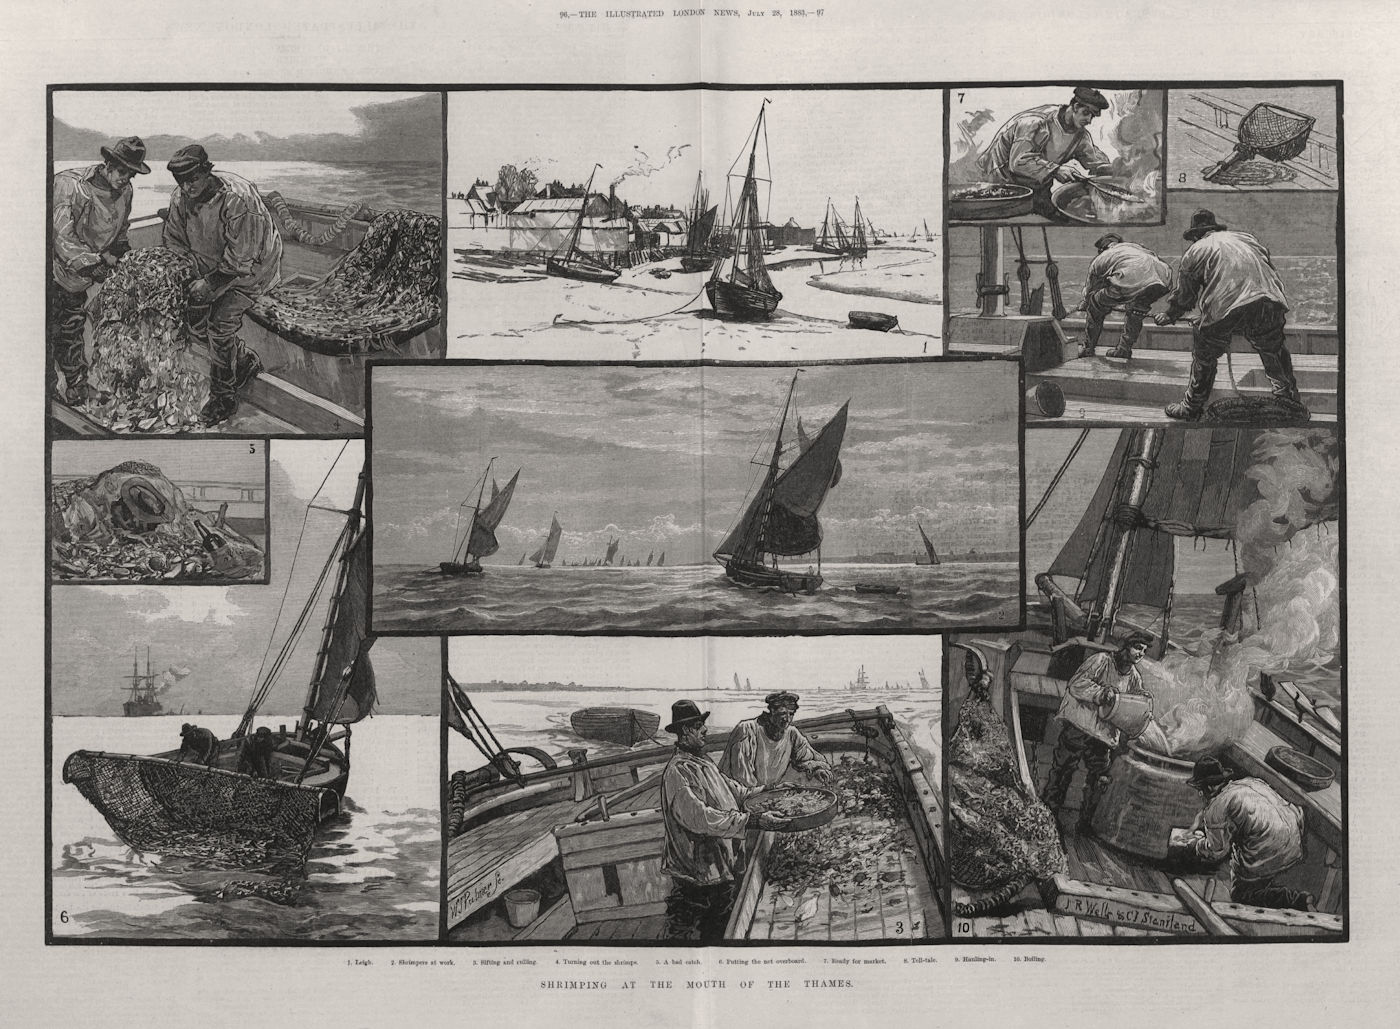 Shrimping at the mouth of the Thames. Leigh-on-Sea. Fishermen 1883 old print